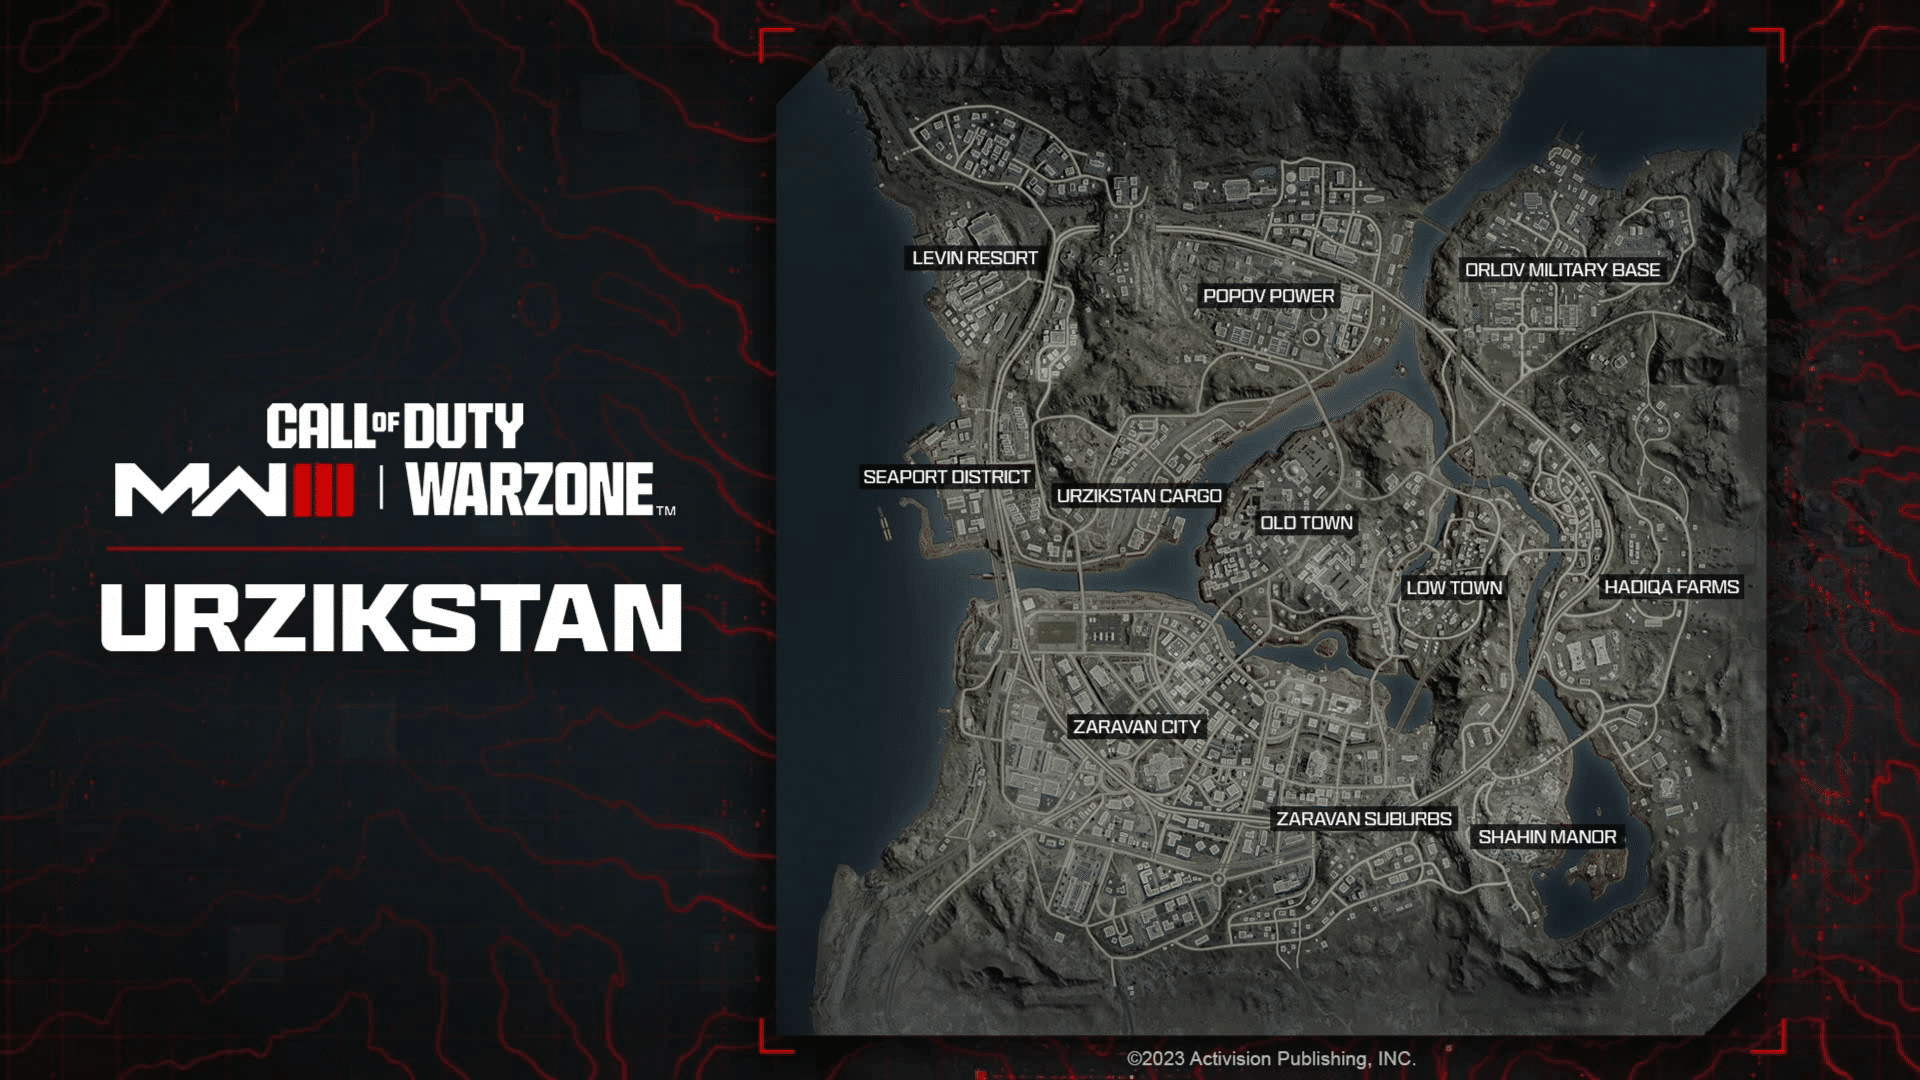 Modern Warfare 3 Zombies lets fans play new Warzone map at launch - Charlie  INTEL